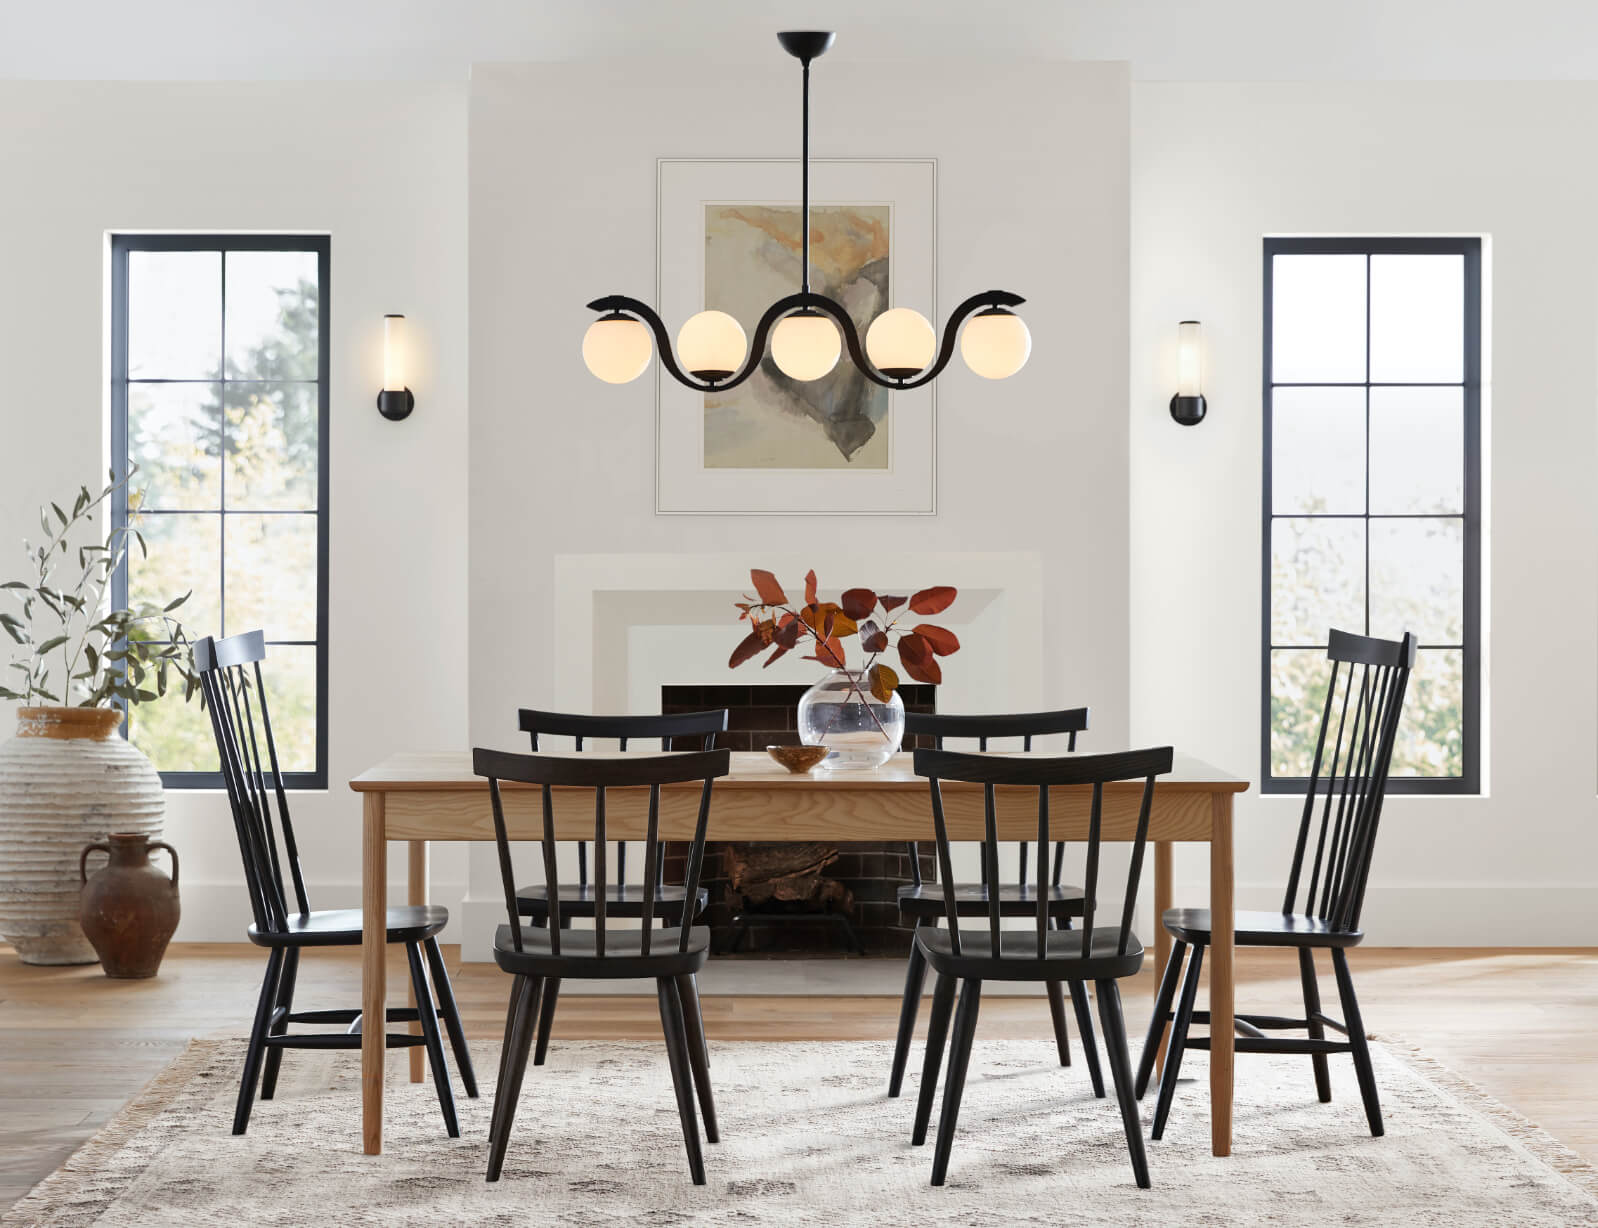 How To Choose Dining Room Lighting, Dining Room Light Fittings